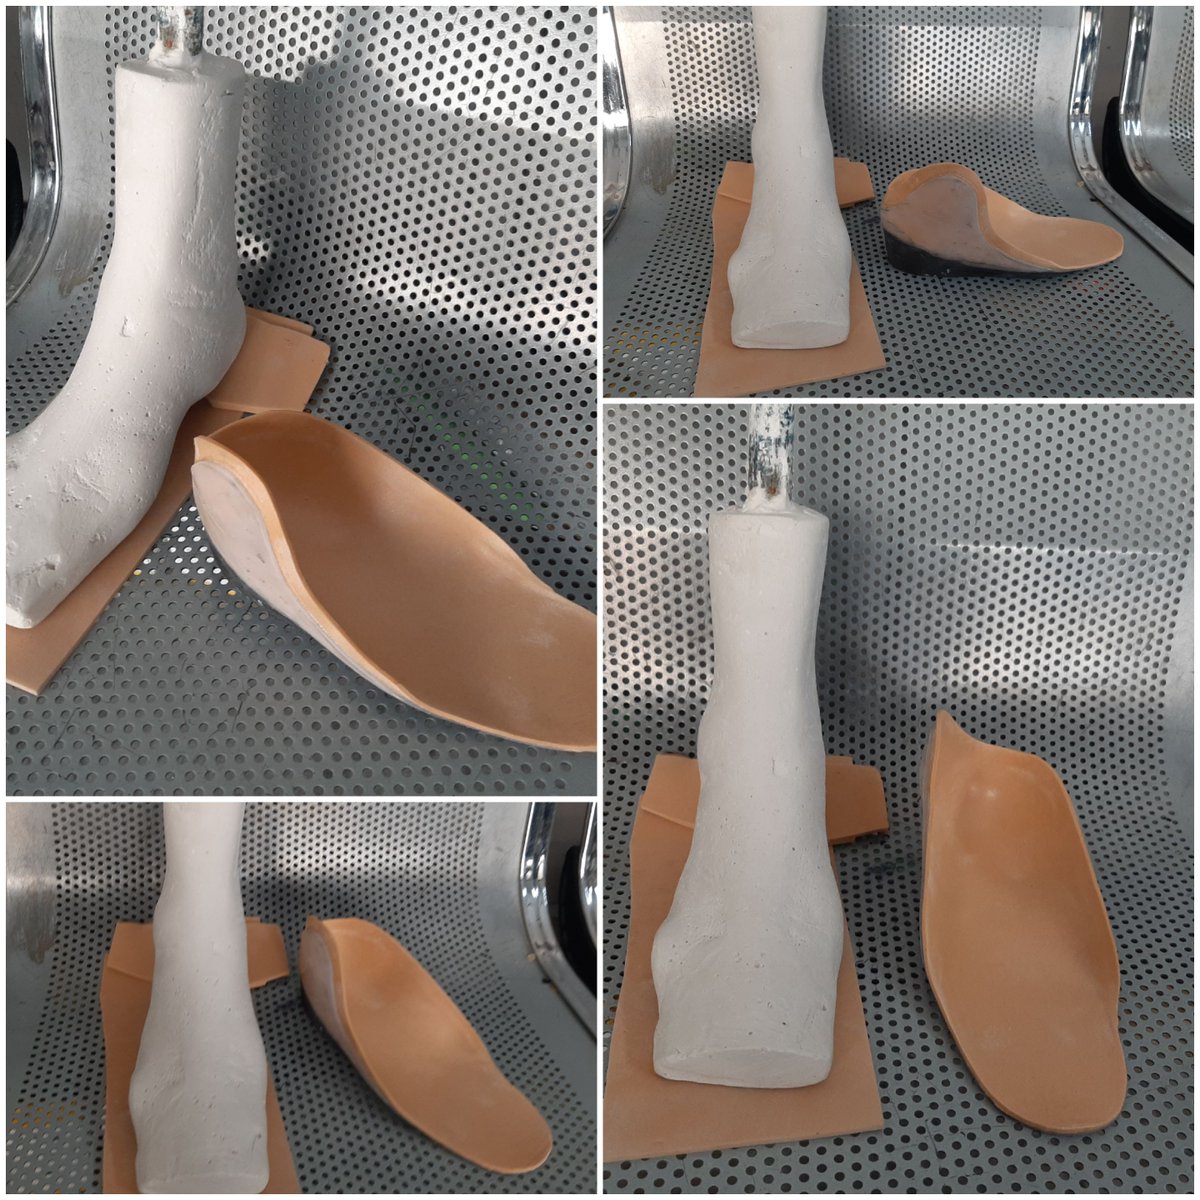 Insoles for flat feet - Customized orthotic insoles from my care are highly specialized medical devices that are made specifically to support the misalignment of your feet.  #insoles #flatfeet #pesplanus #shoeinserts #custom_orthotics #insoles_flatfeet #manufacturers